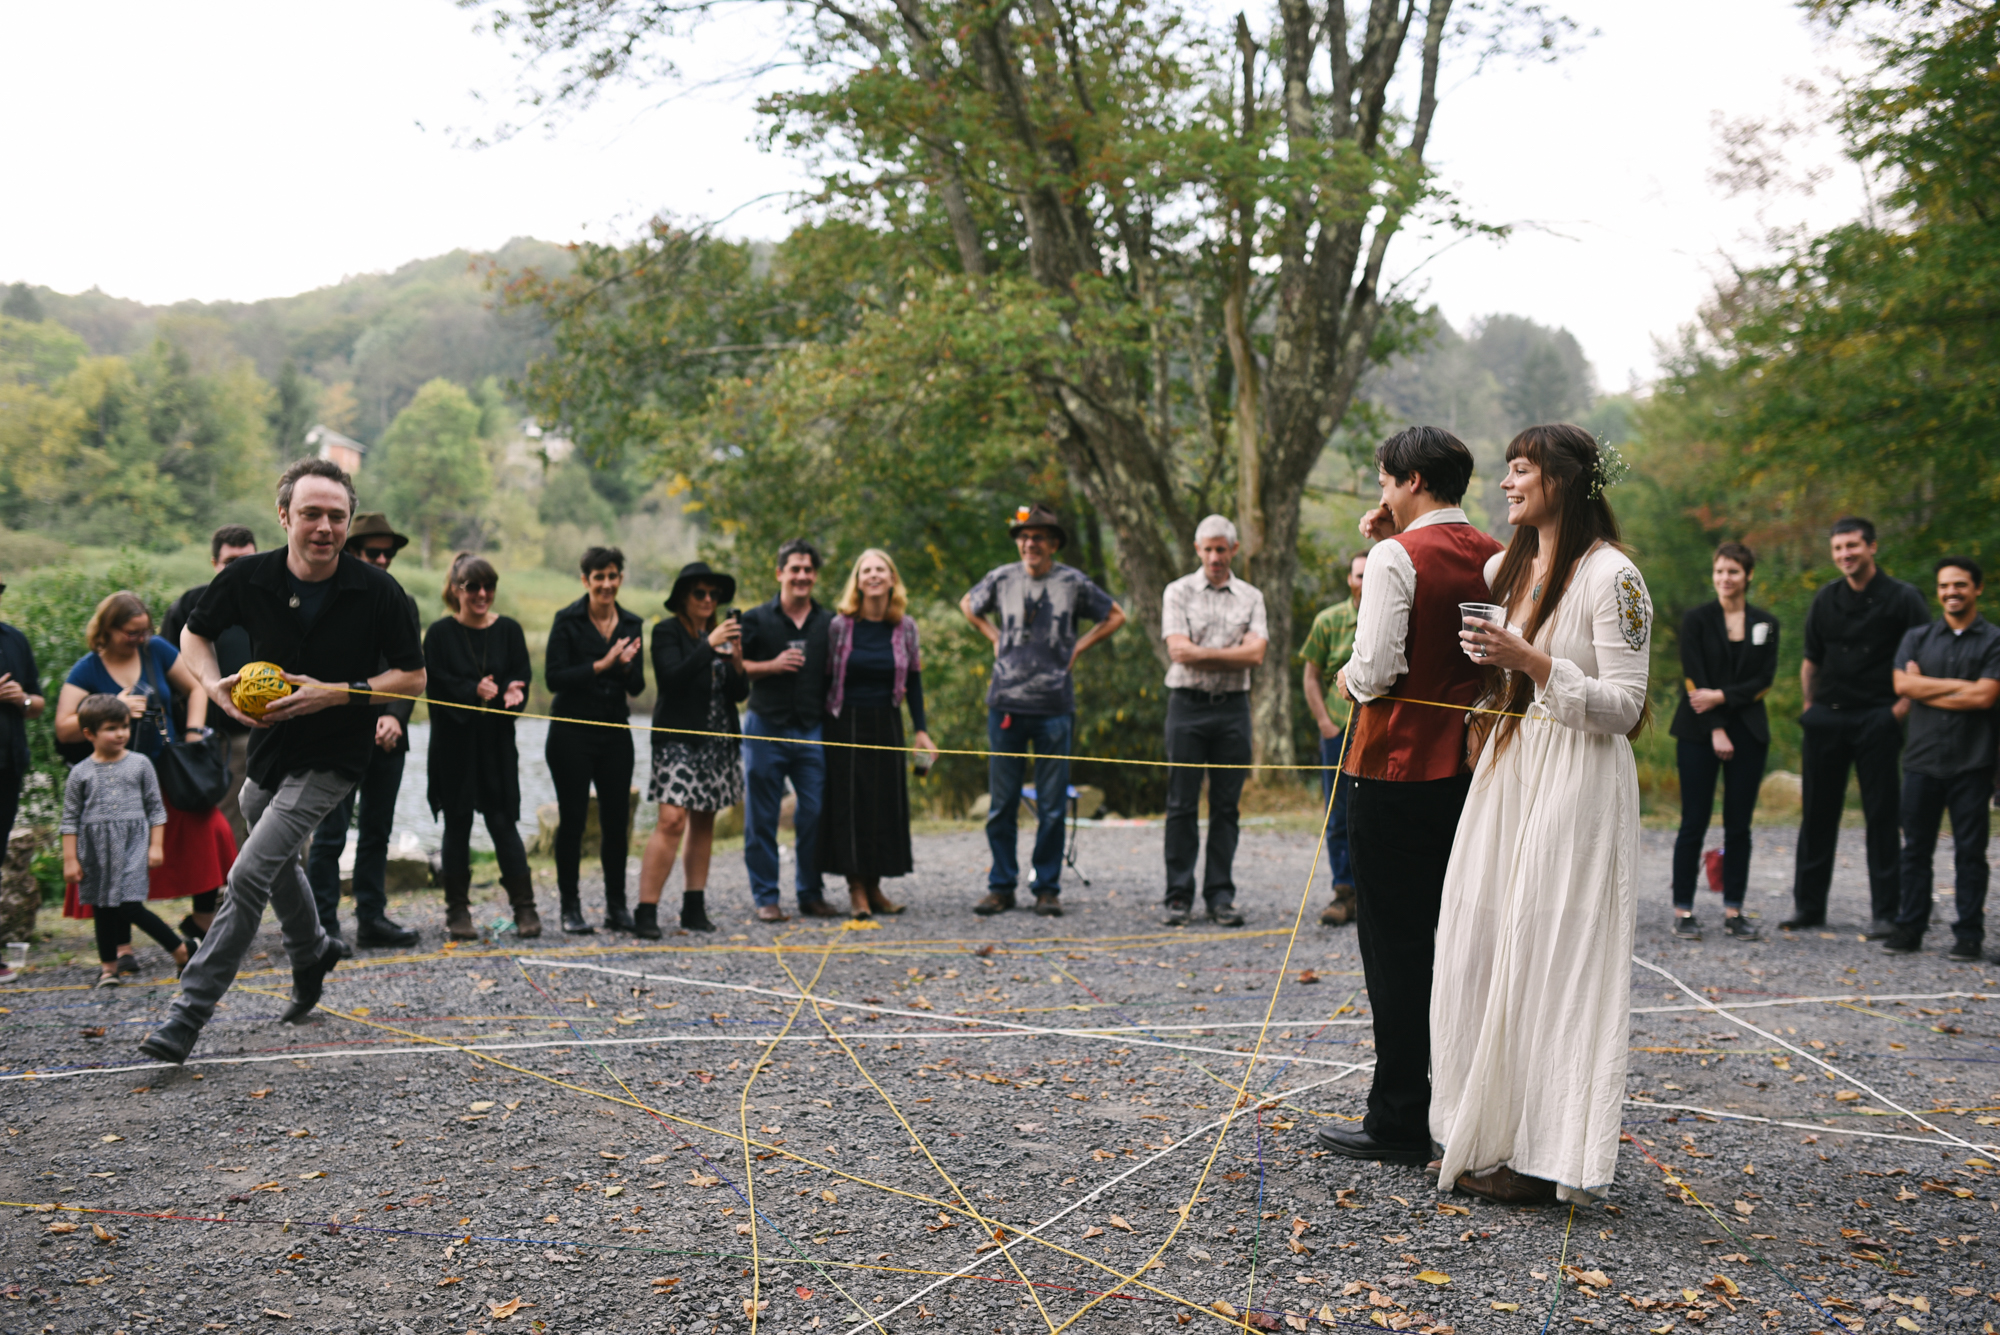  Mountain Wedding, Outdoors, Rustic, West Virginia, Maryland Wedding Photographer, DIY, Casual, bride and groom standing together being encircled with yarn, yarn weaving ceremony 